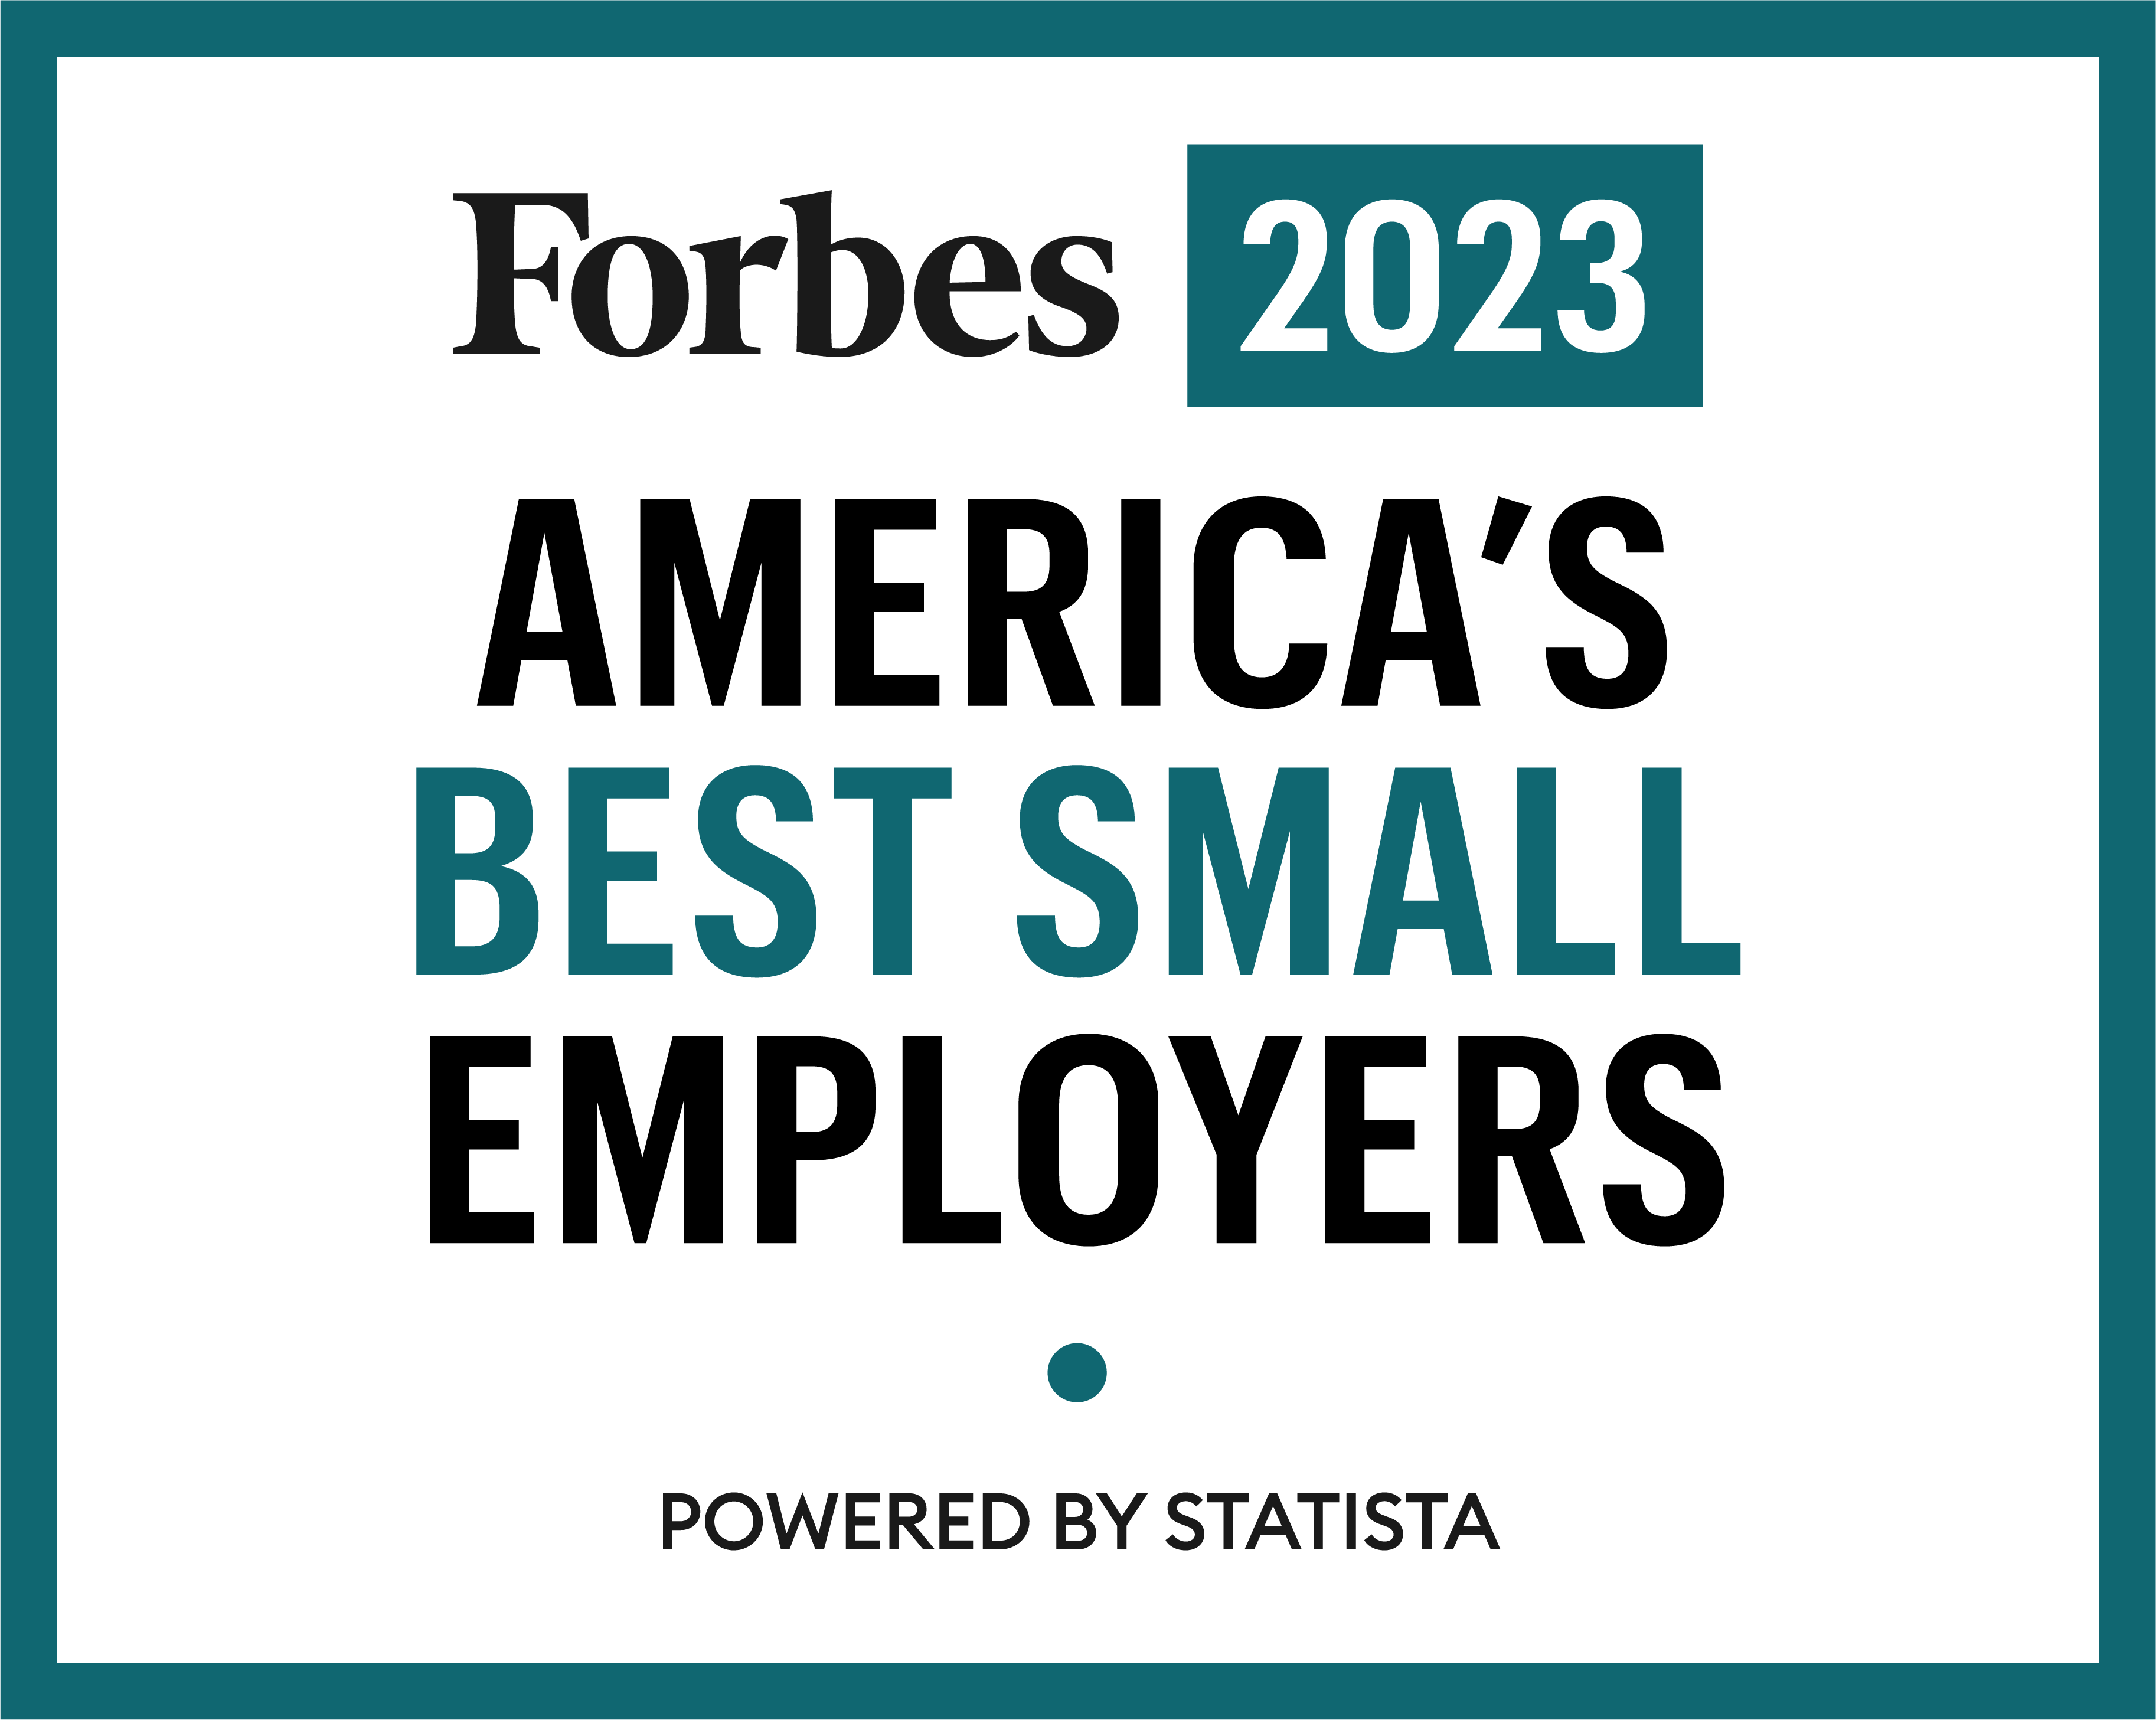 Forbes 2023 America's Best Small Employers (Powered by Statista)